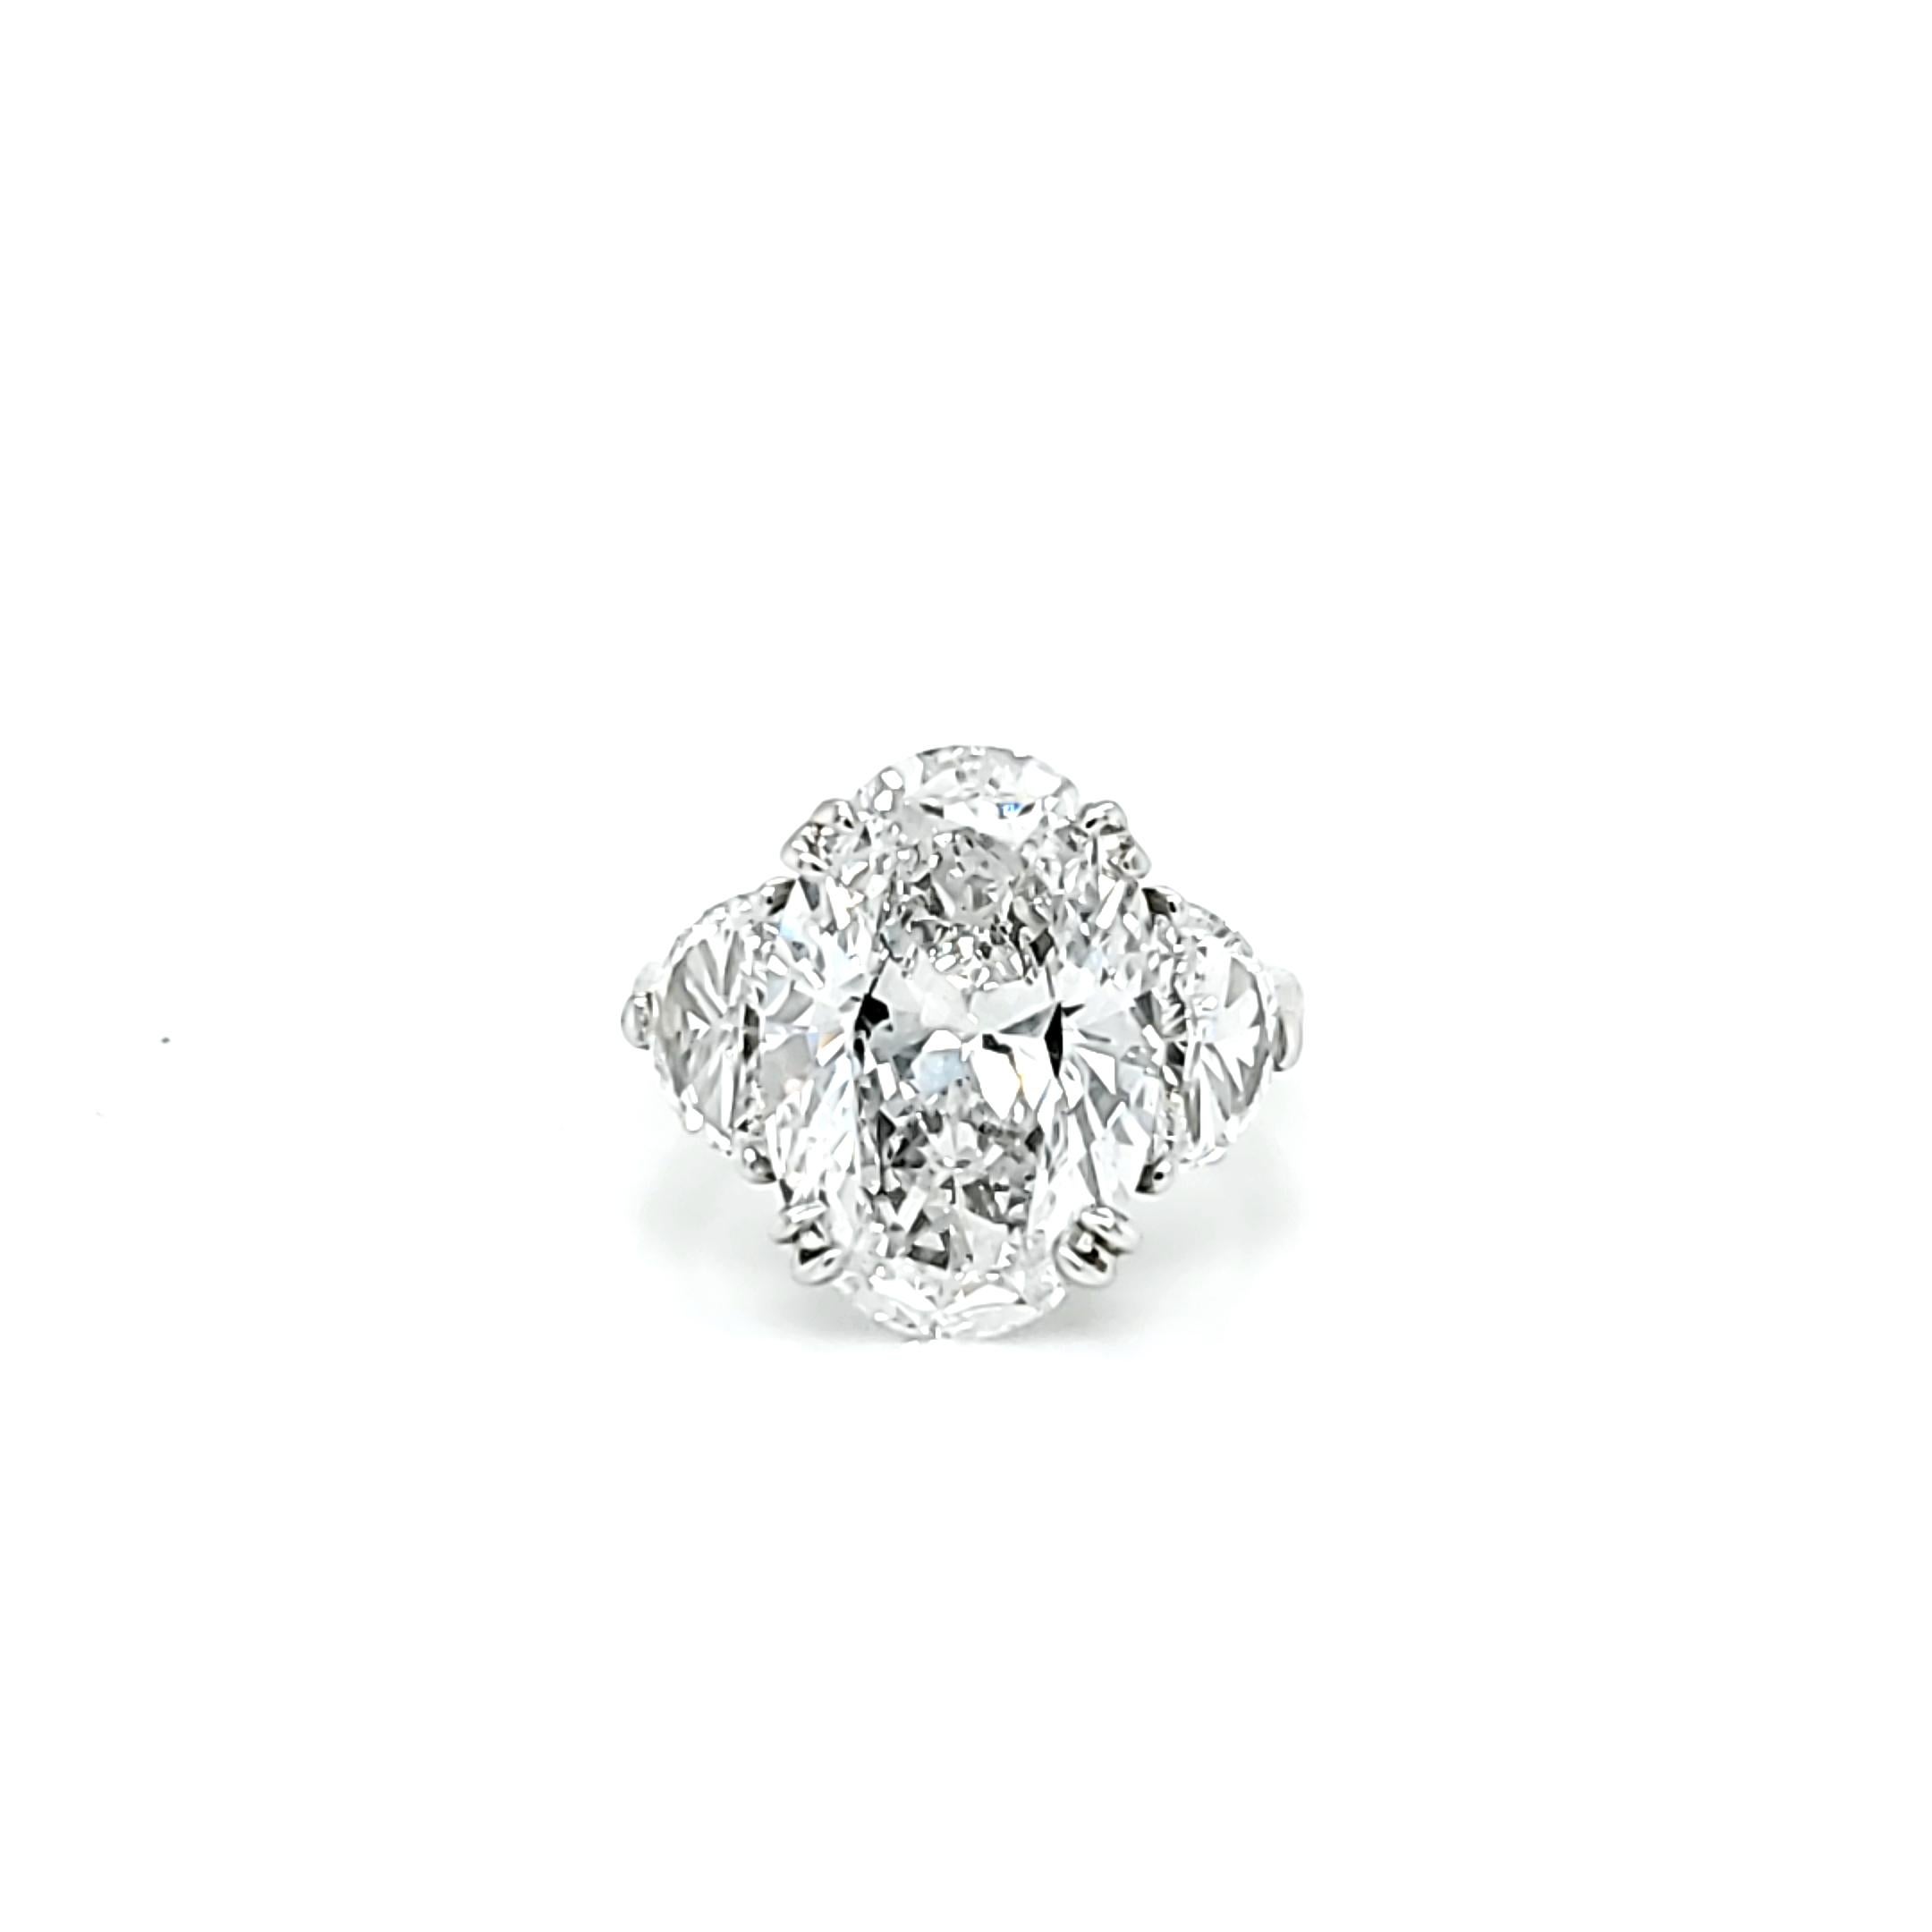 Center Stone is 6.16 carat Oval Cut Diamond with a D color and SI2 clarity. Side stones are Half Moon shaped diamonds weighing 1.02 carats total and a similar color and clarity to the center stone. Set in a platinum ring. The Center stone has strong